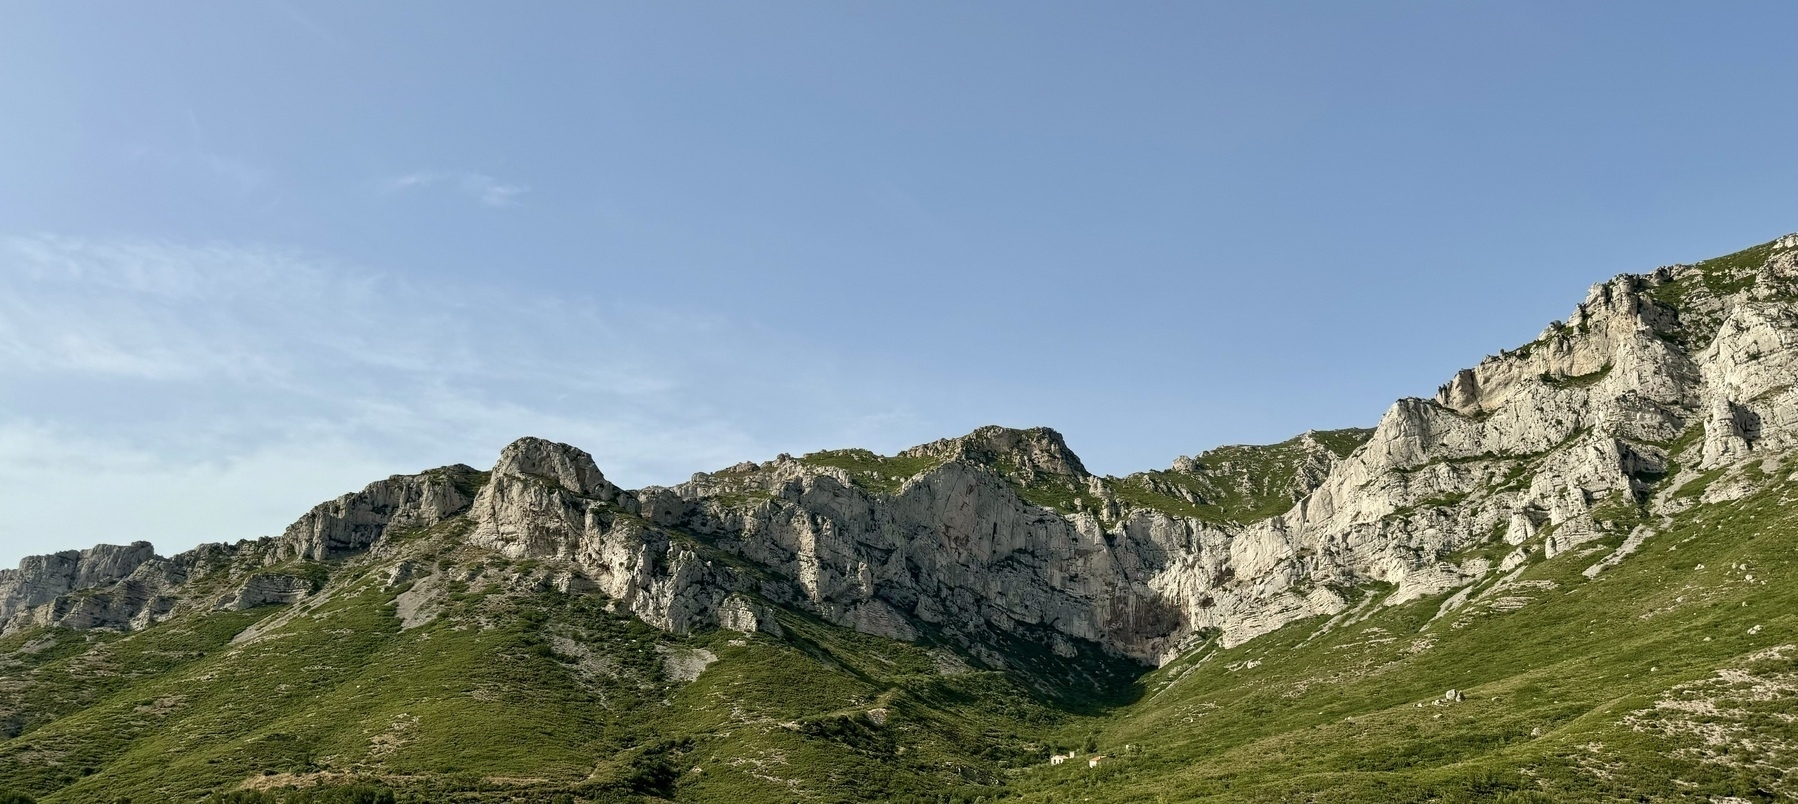 Limestone cliffs in the Calanques National Park.